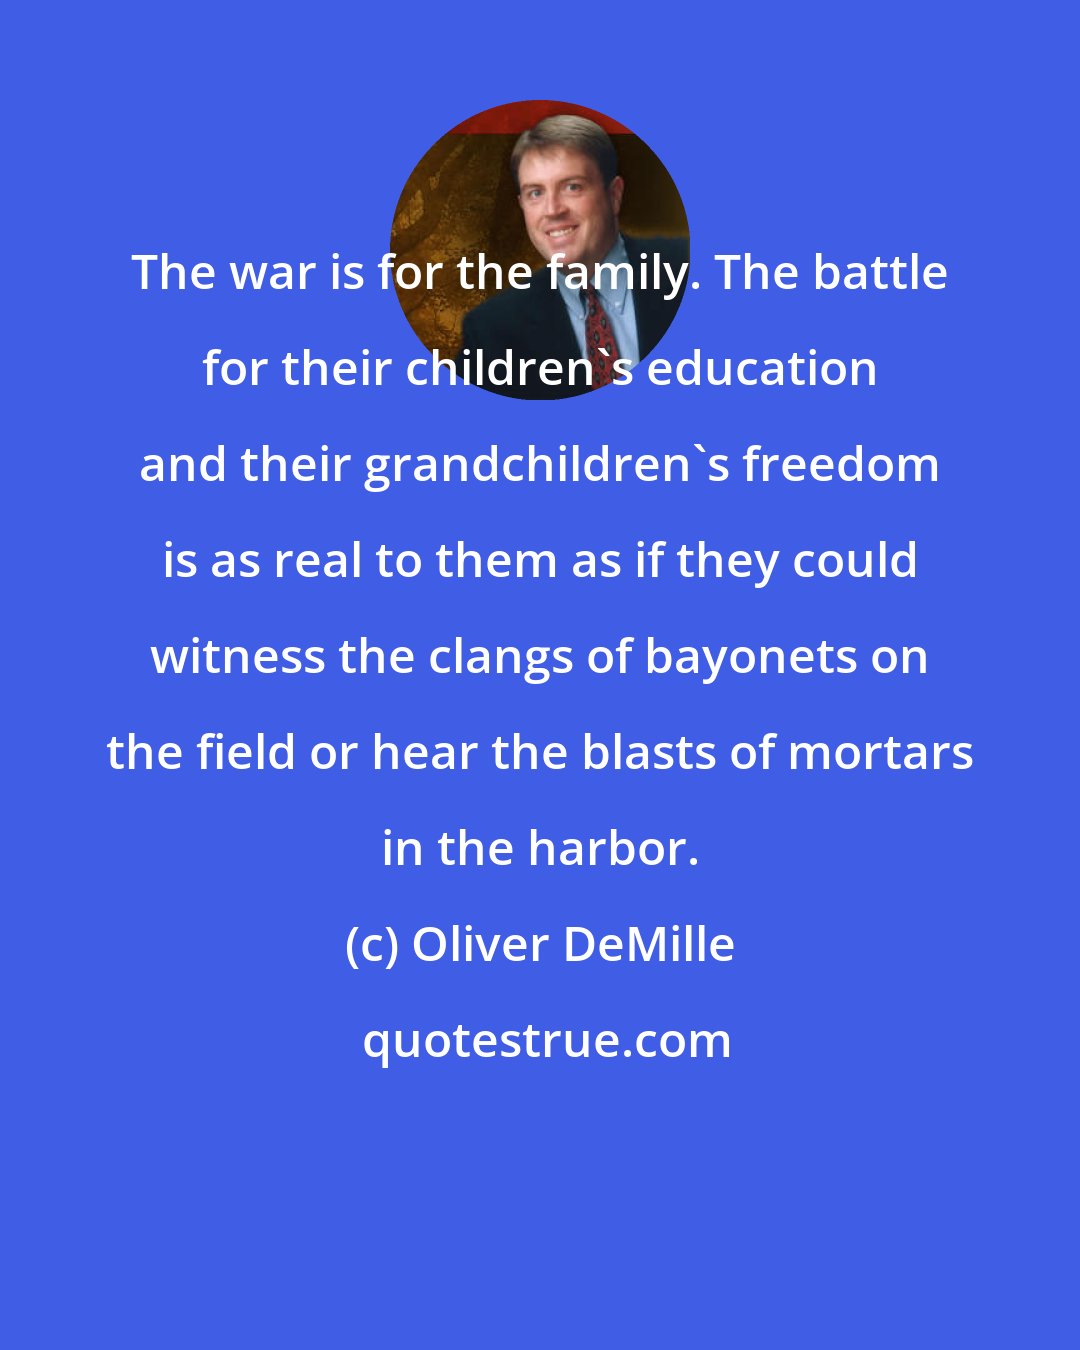 Oliver DeMille: The war is for the family. The battle for their children's education and their grandchildren's freedom is as real to them as if they could witness the clangs of bayonets on the field or hear the blasts of mortars in the harbor.